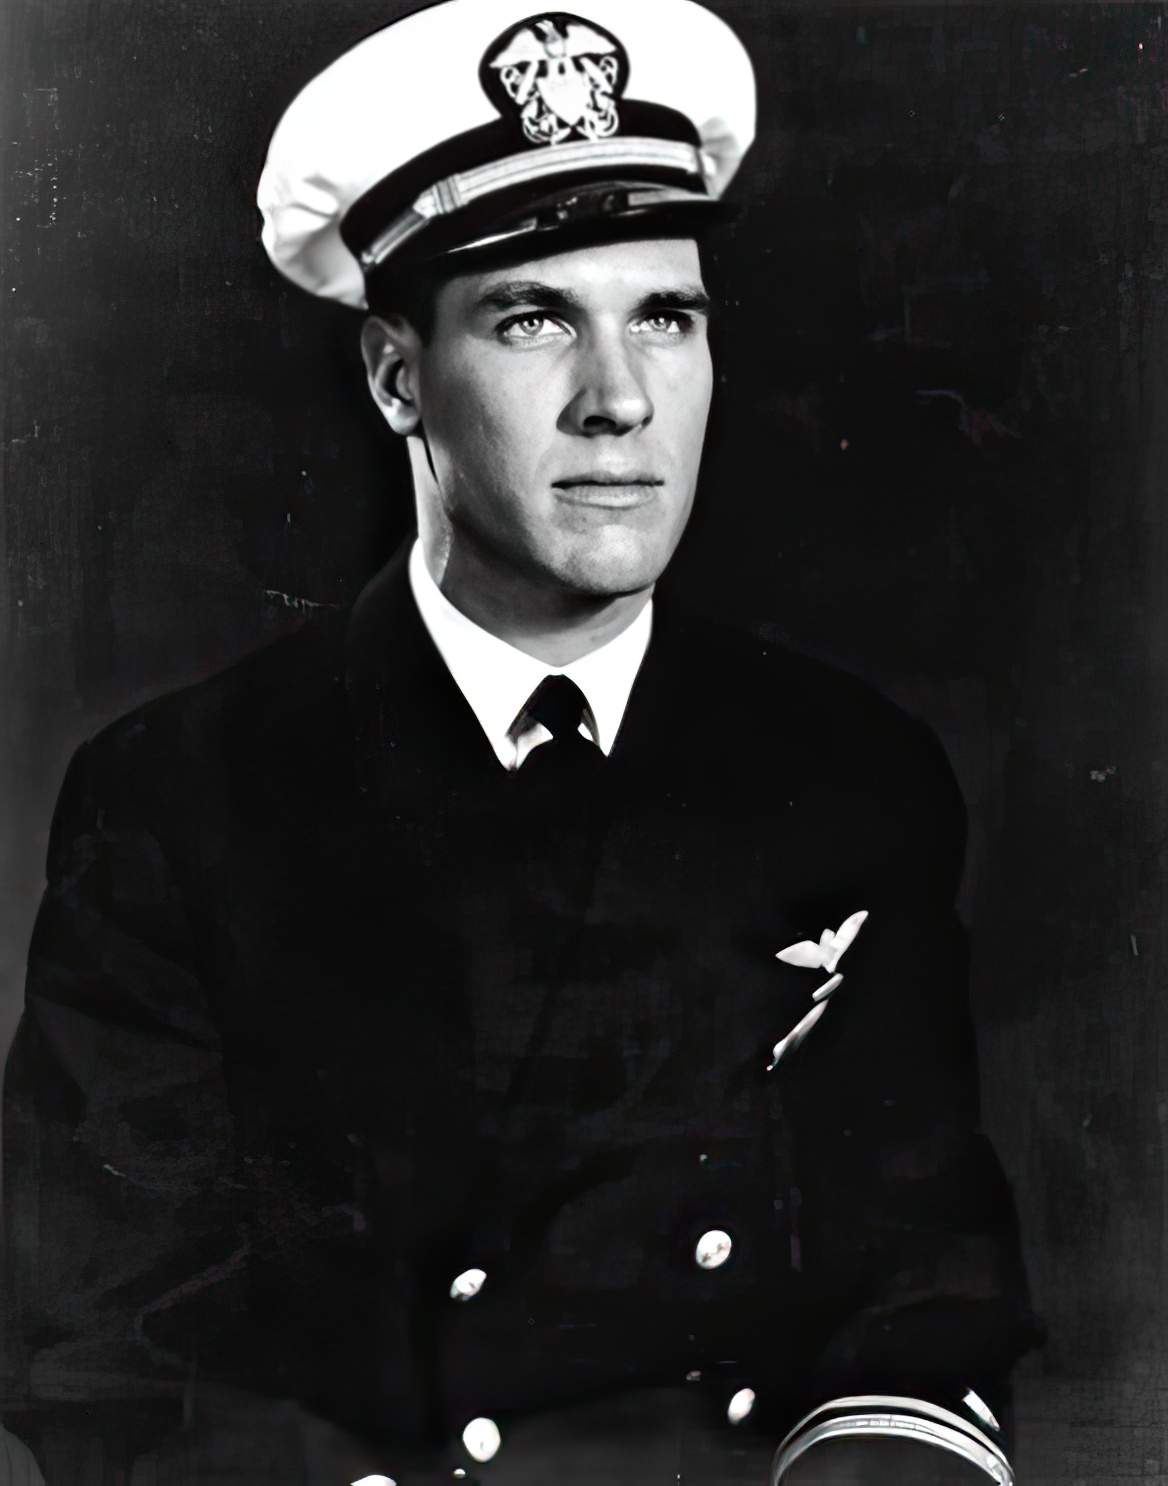 Thomas J. Hudner Jr., Brown's wingman, who was awarded the Medal of Honor for attempting to save him